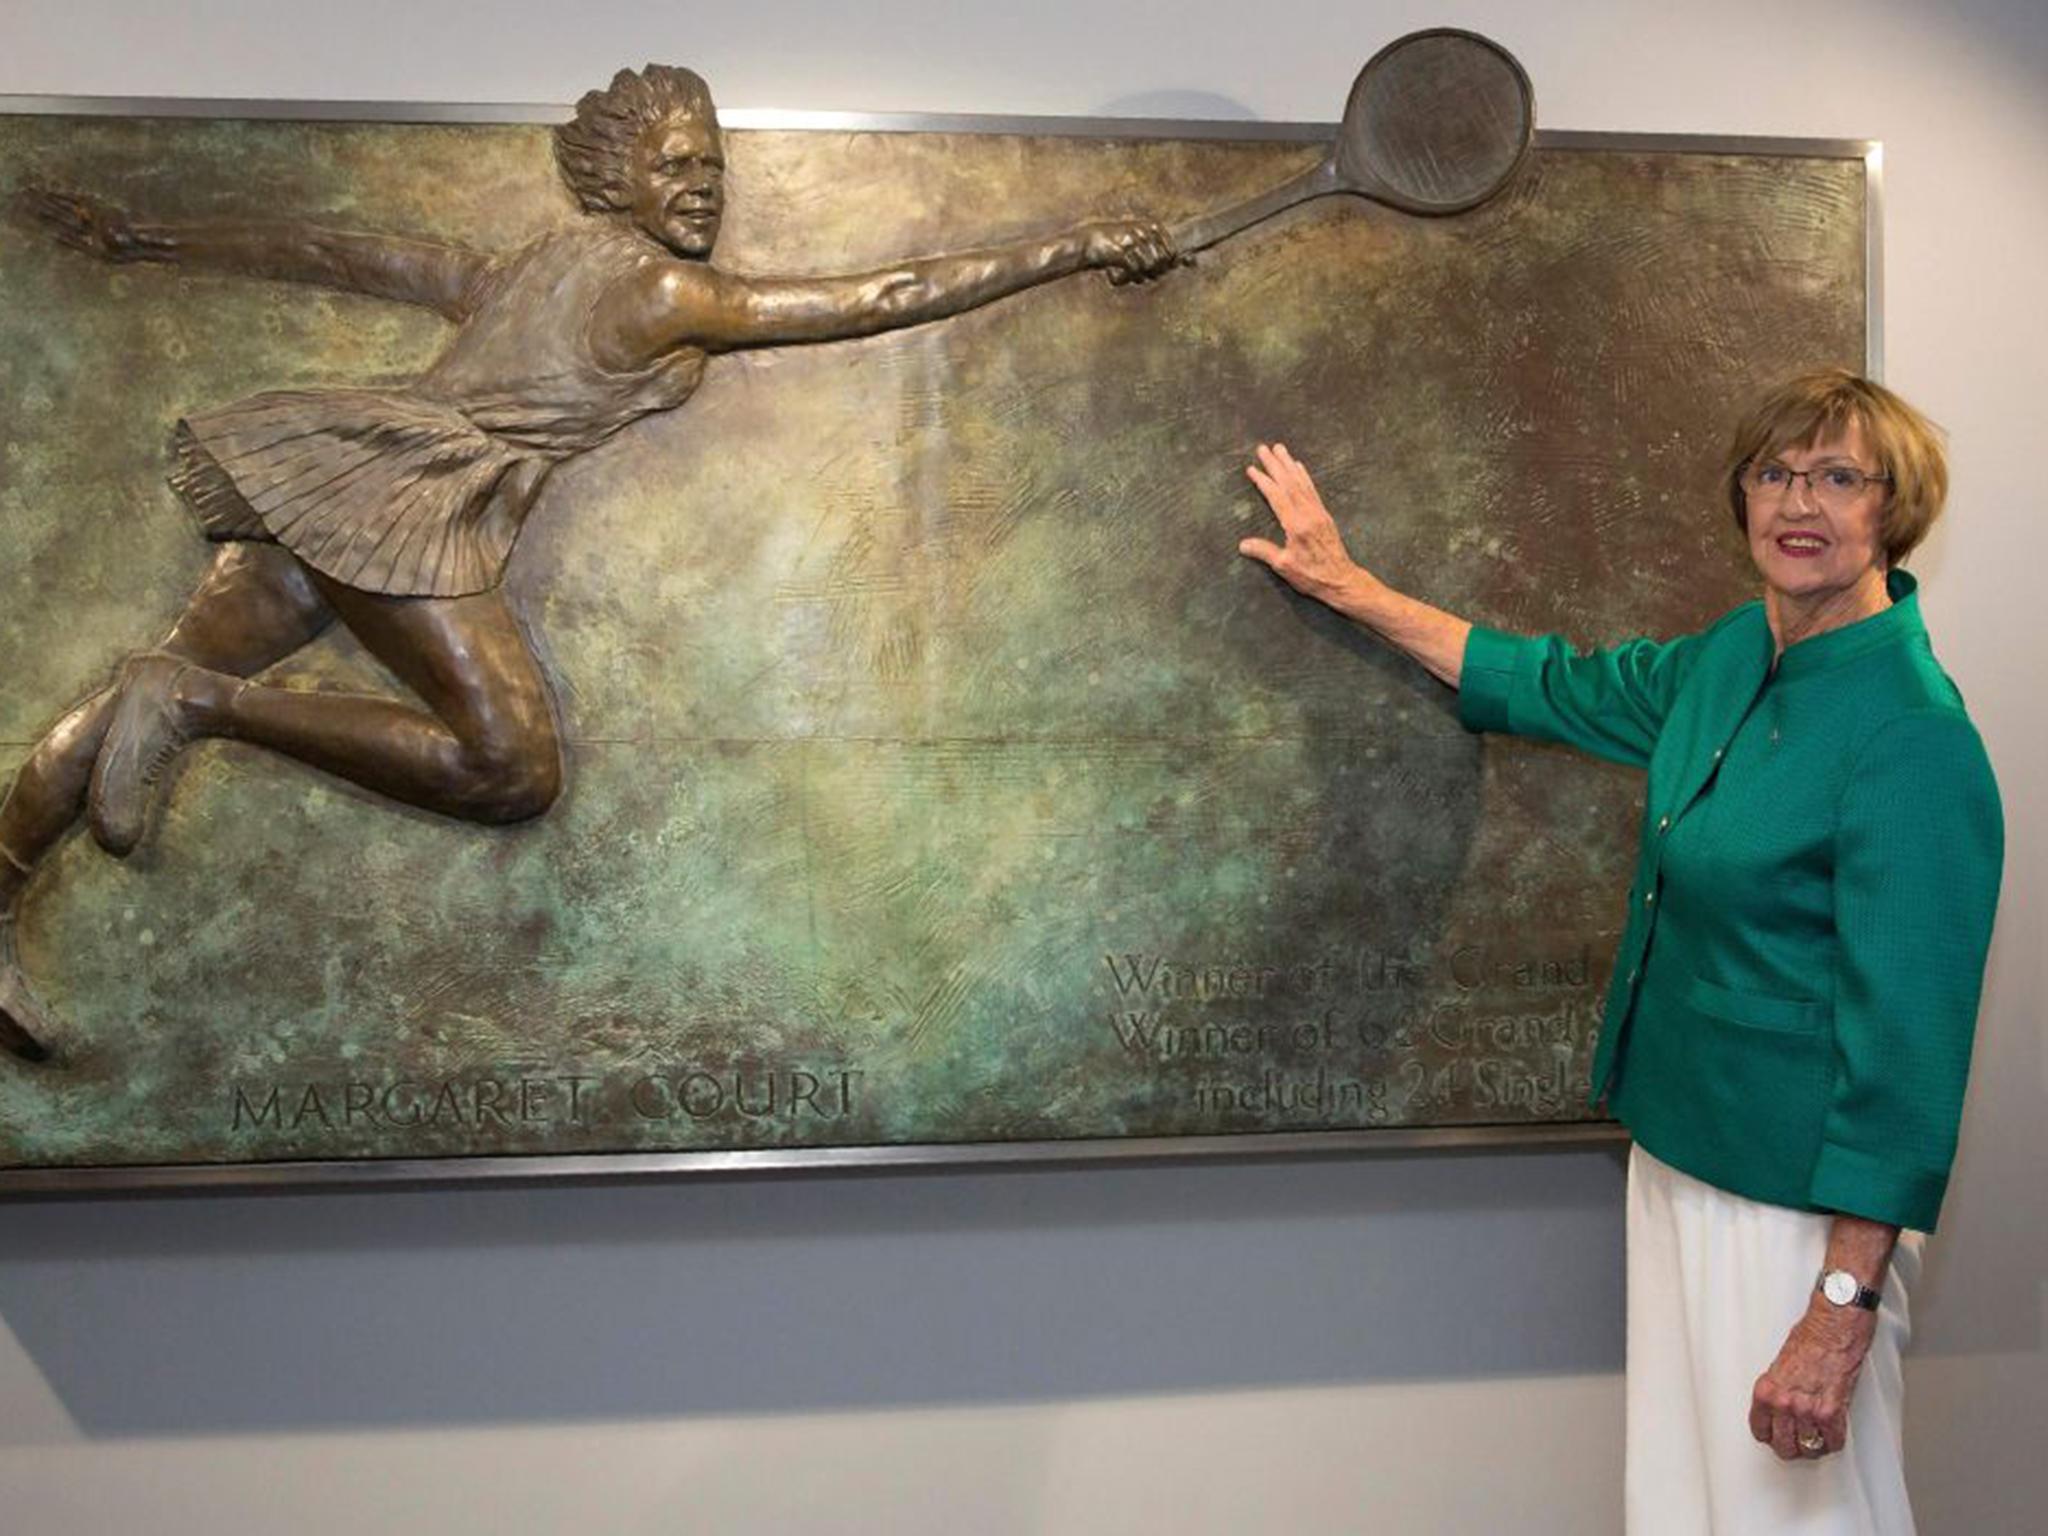 Margaret Court posing at an the opening ceremony of the Margaret Court Arena at the 2015 Australian Open tennis tournament in Melbourne